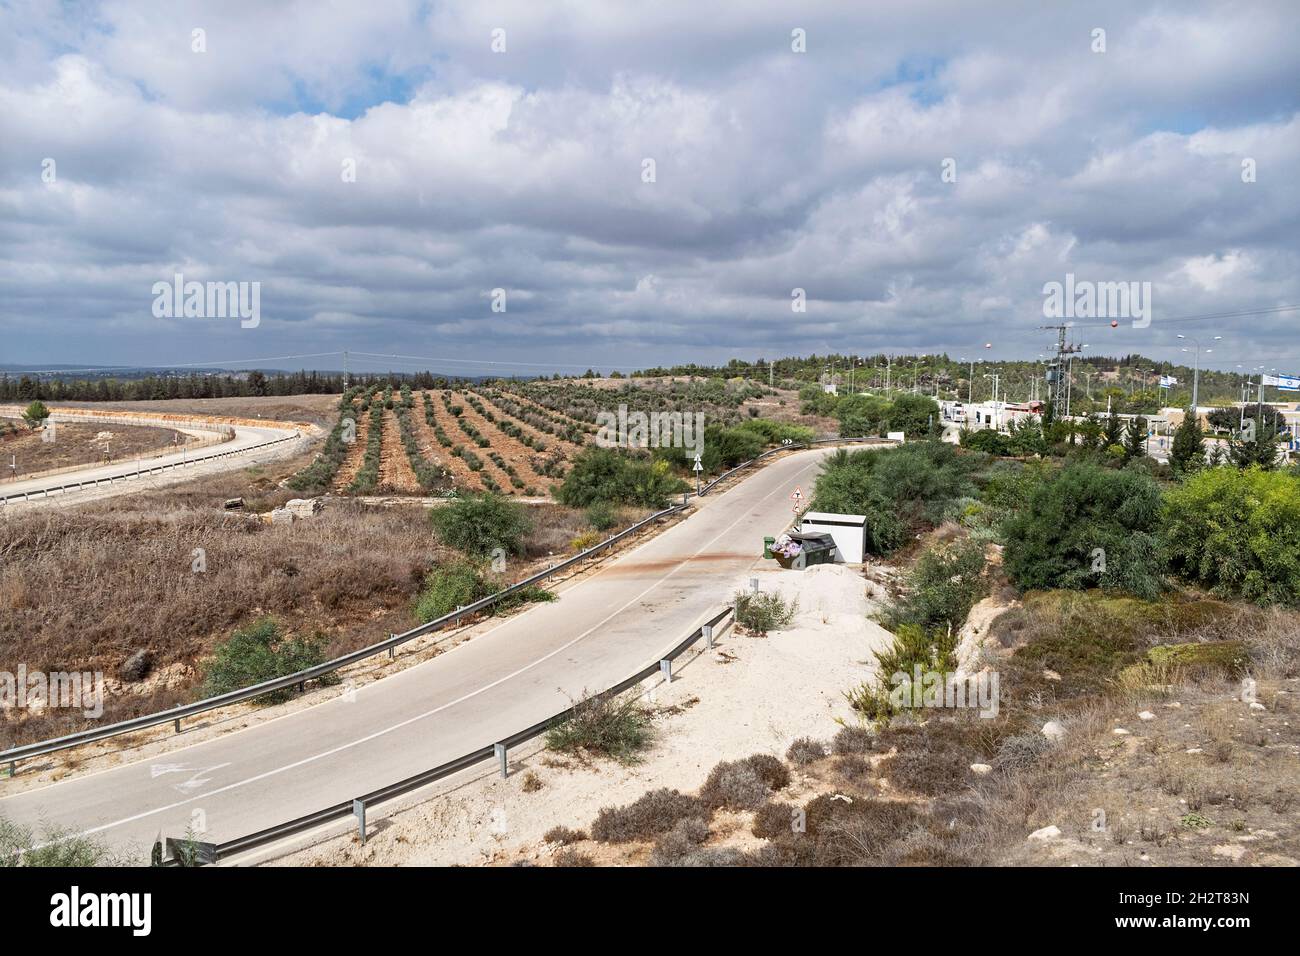 Israeli checkpoint at the entrance to the Gush Etzion region of the West Bank from the Ha-Lamad-Hey observation point with orchards in the background Stock Photo